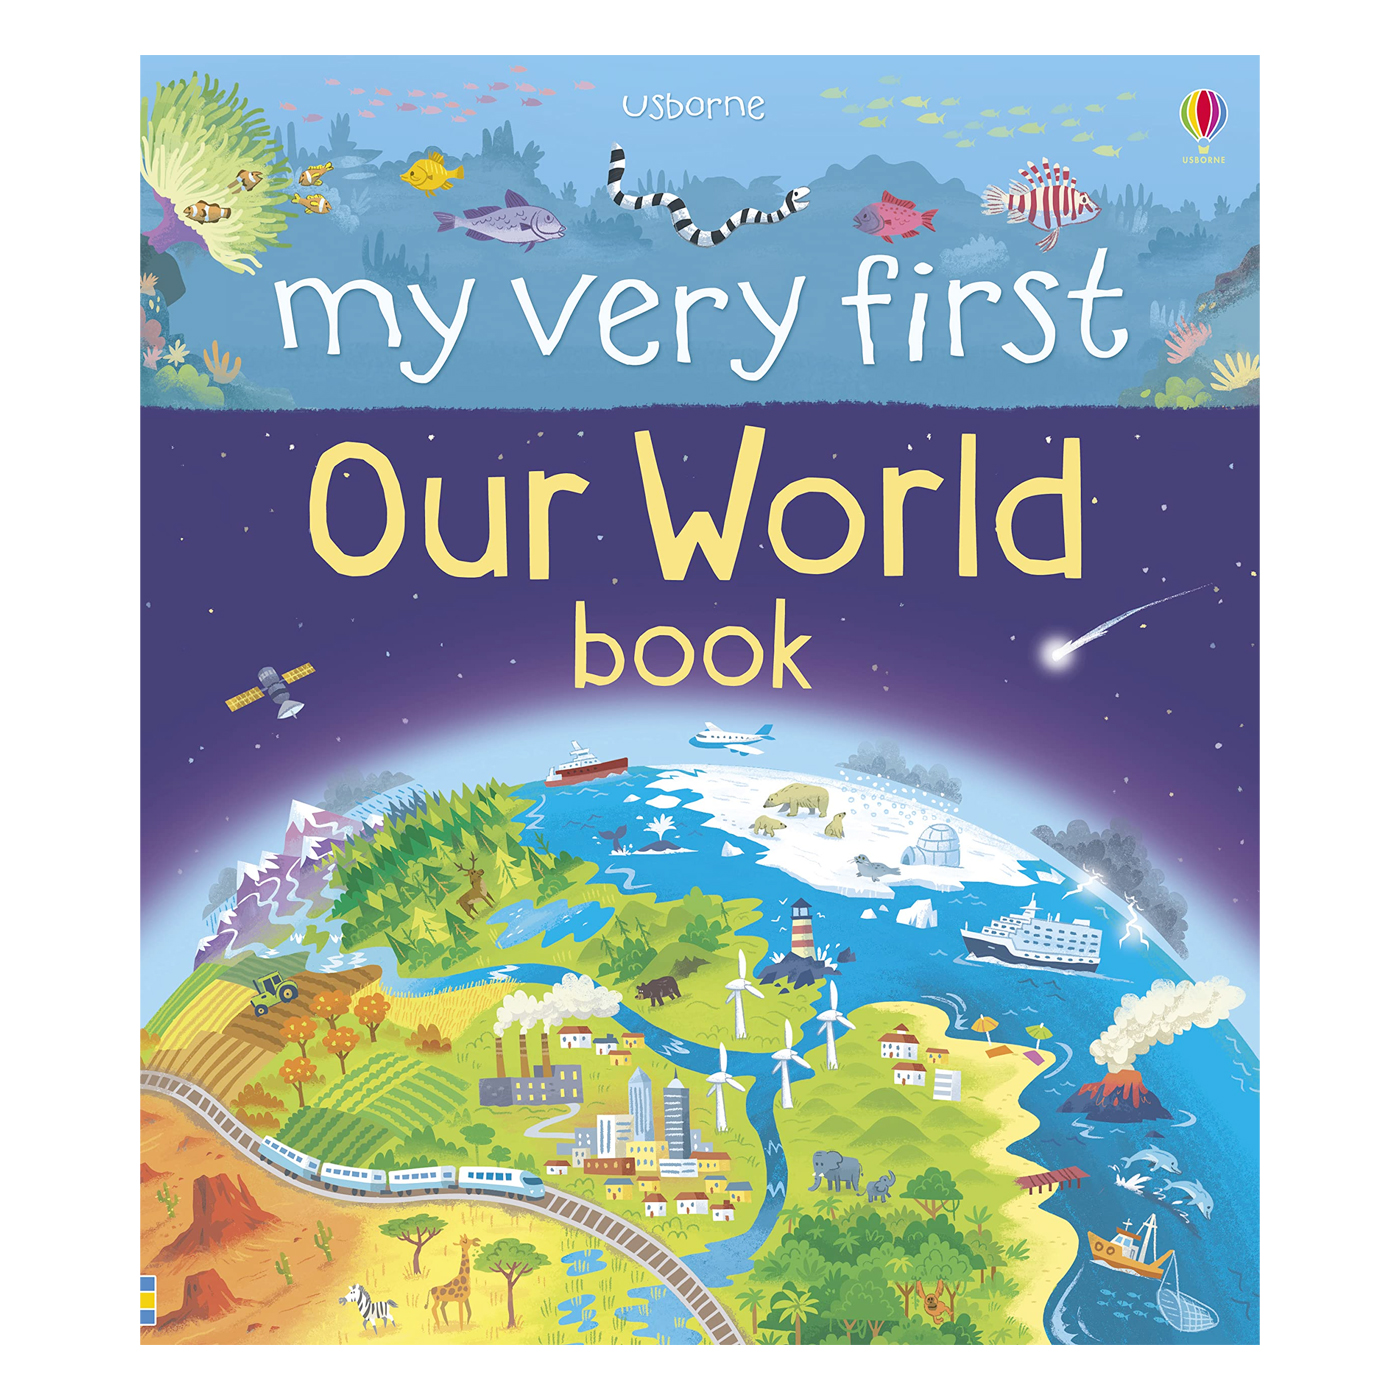  MYy Very First Book About Our World